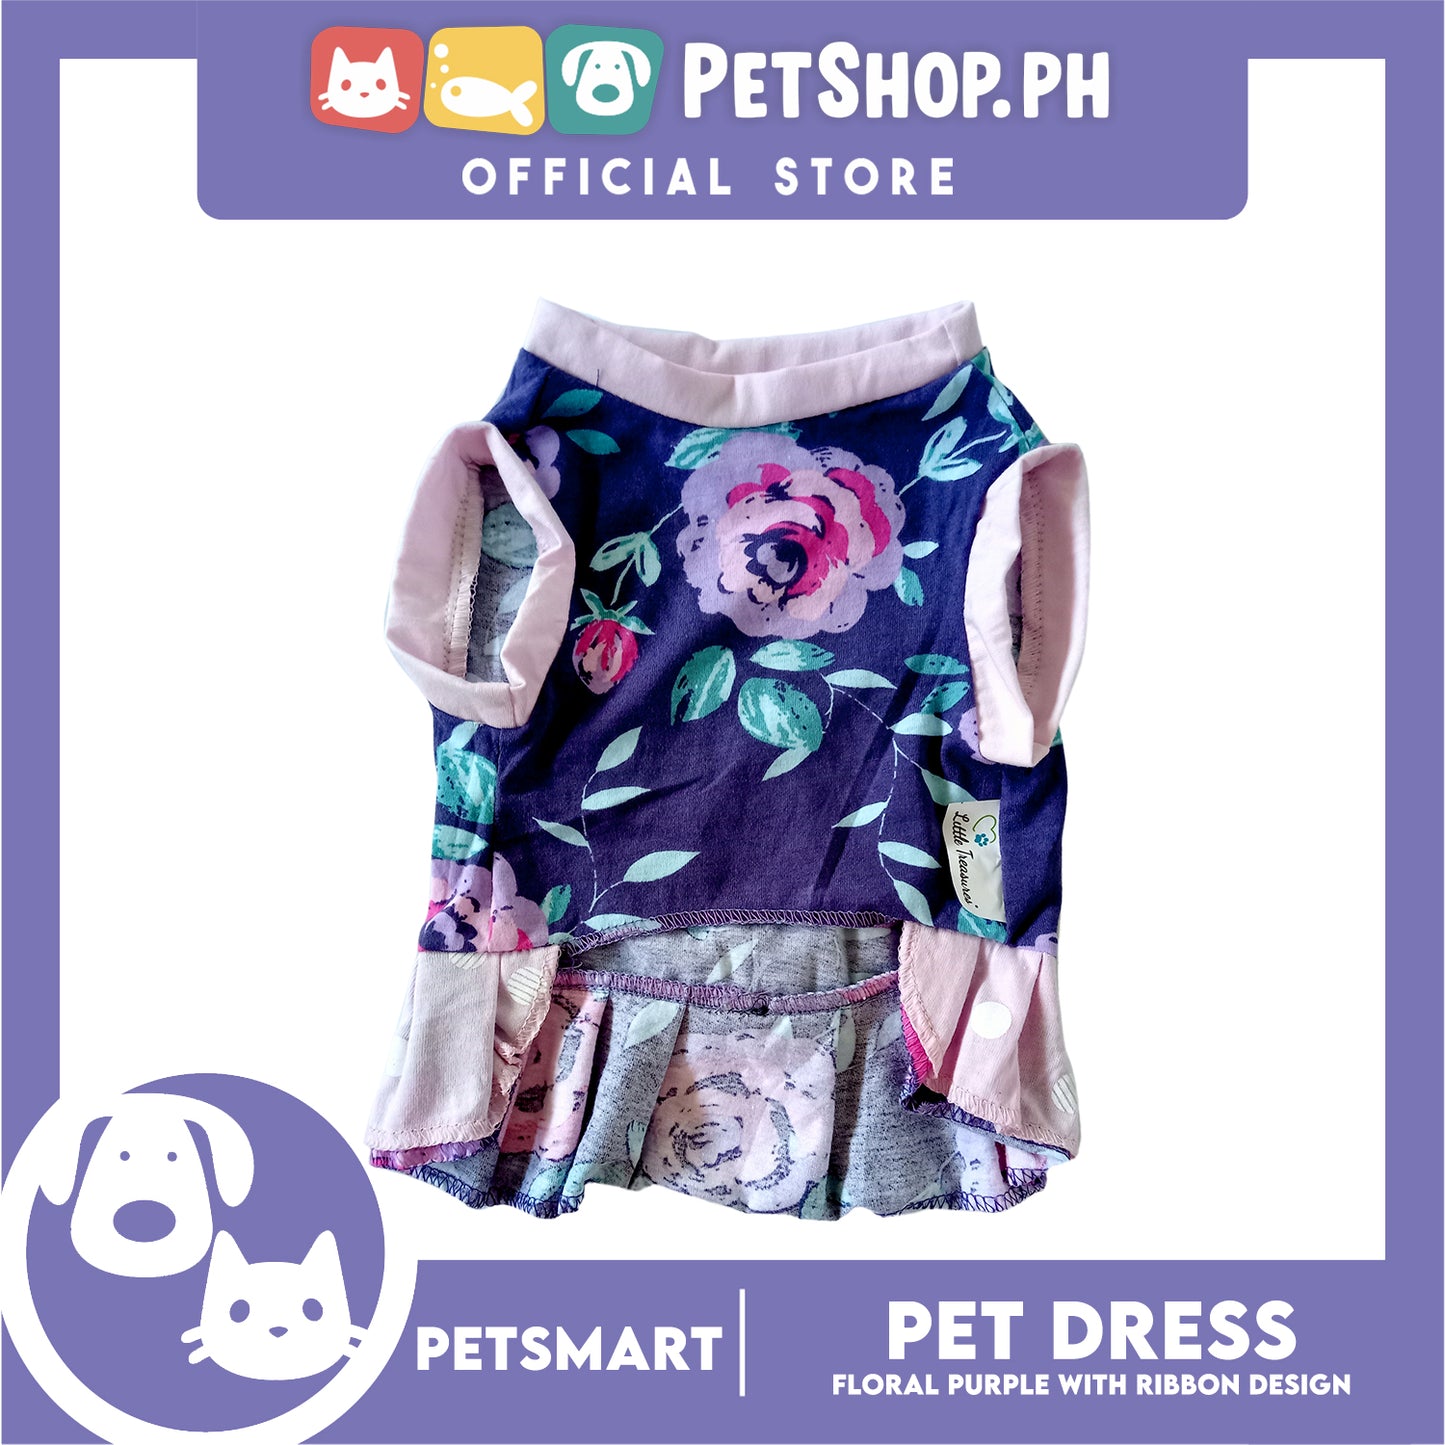 Pet Dress, Floral Purple with Ribbon Design DG-CTN159S (Small) Perfect Fit For Dogs And Cats, Pet Clothes, Soft and Comfortable Pet Clothing